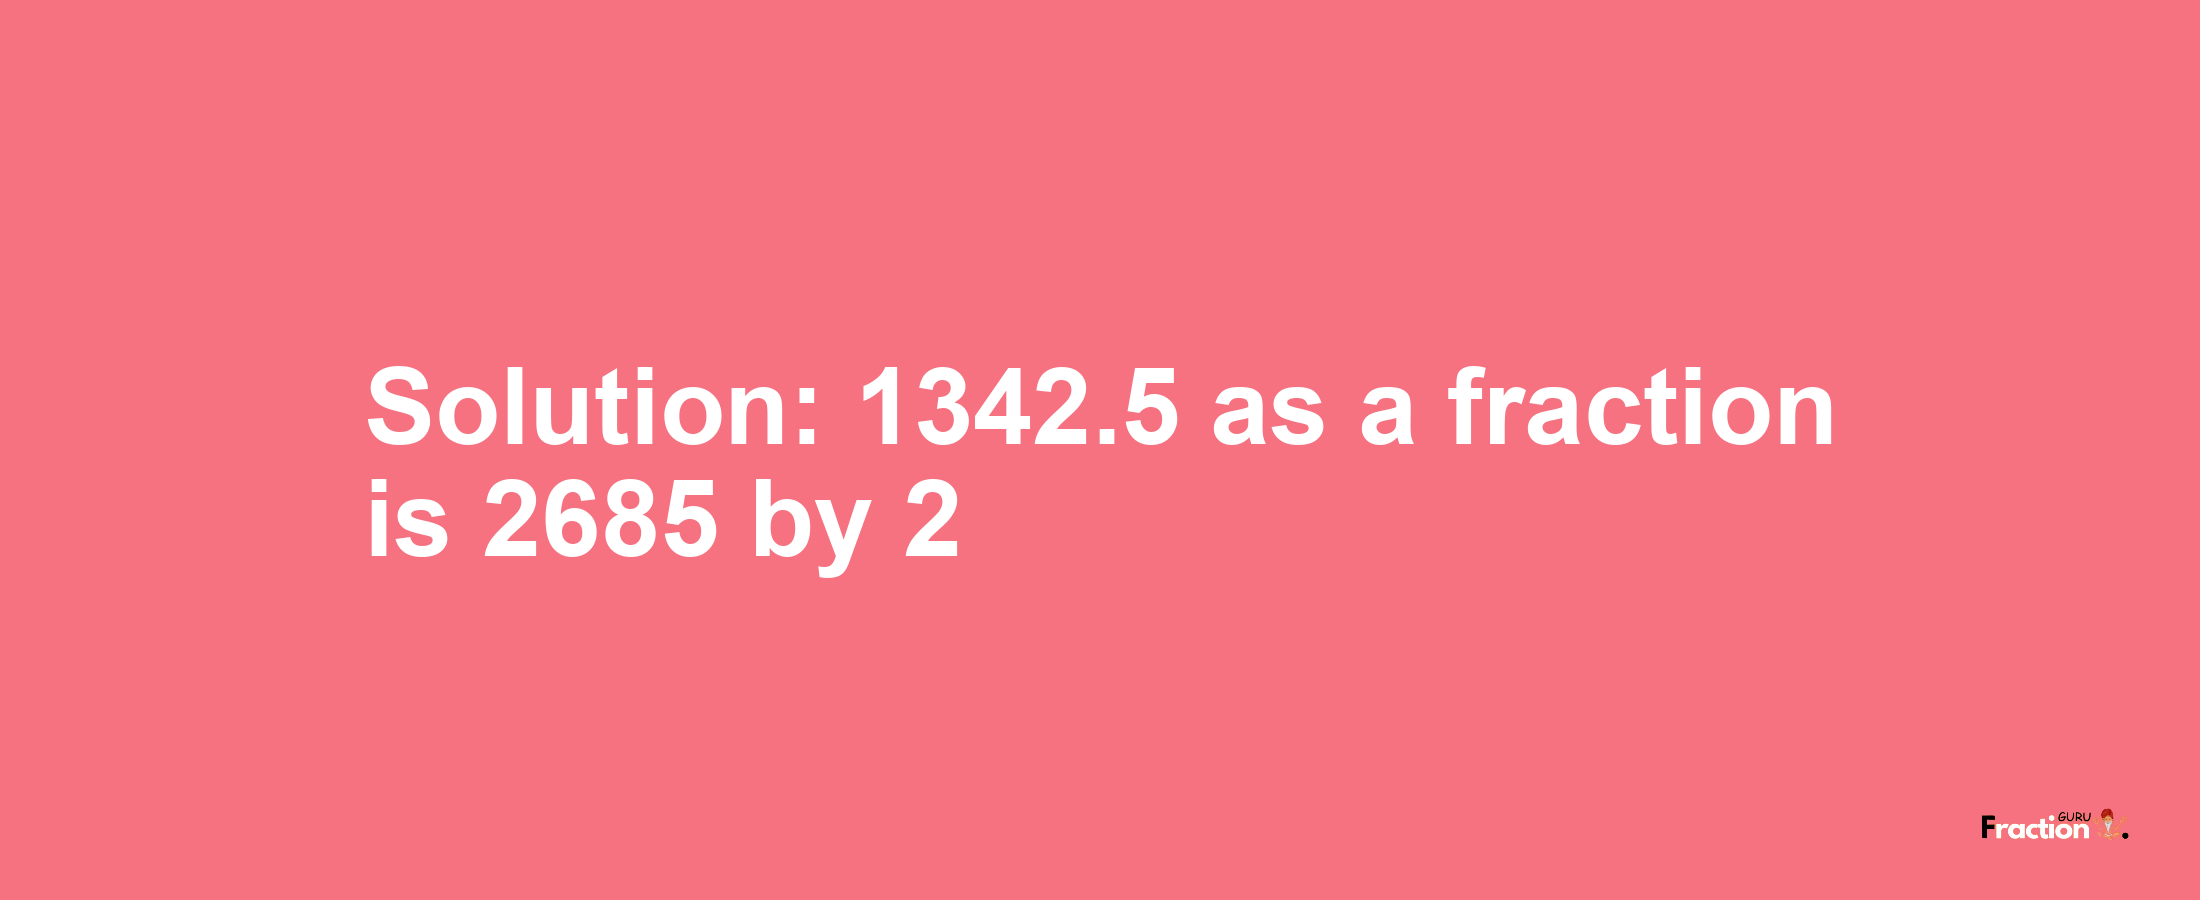 Solution:1342.5 as a fraction is 2685/2